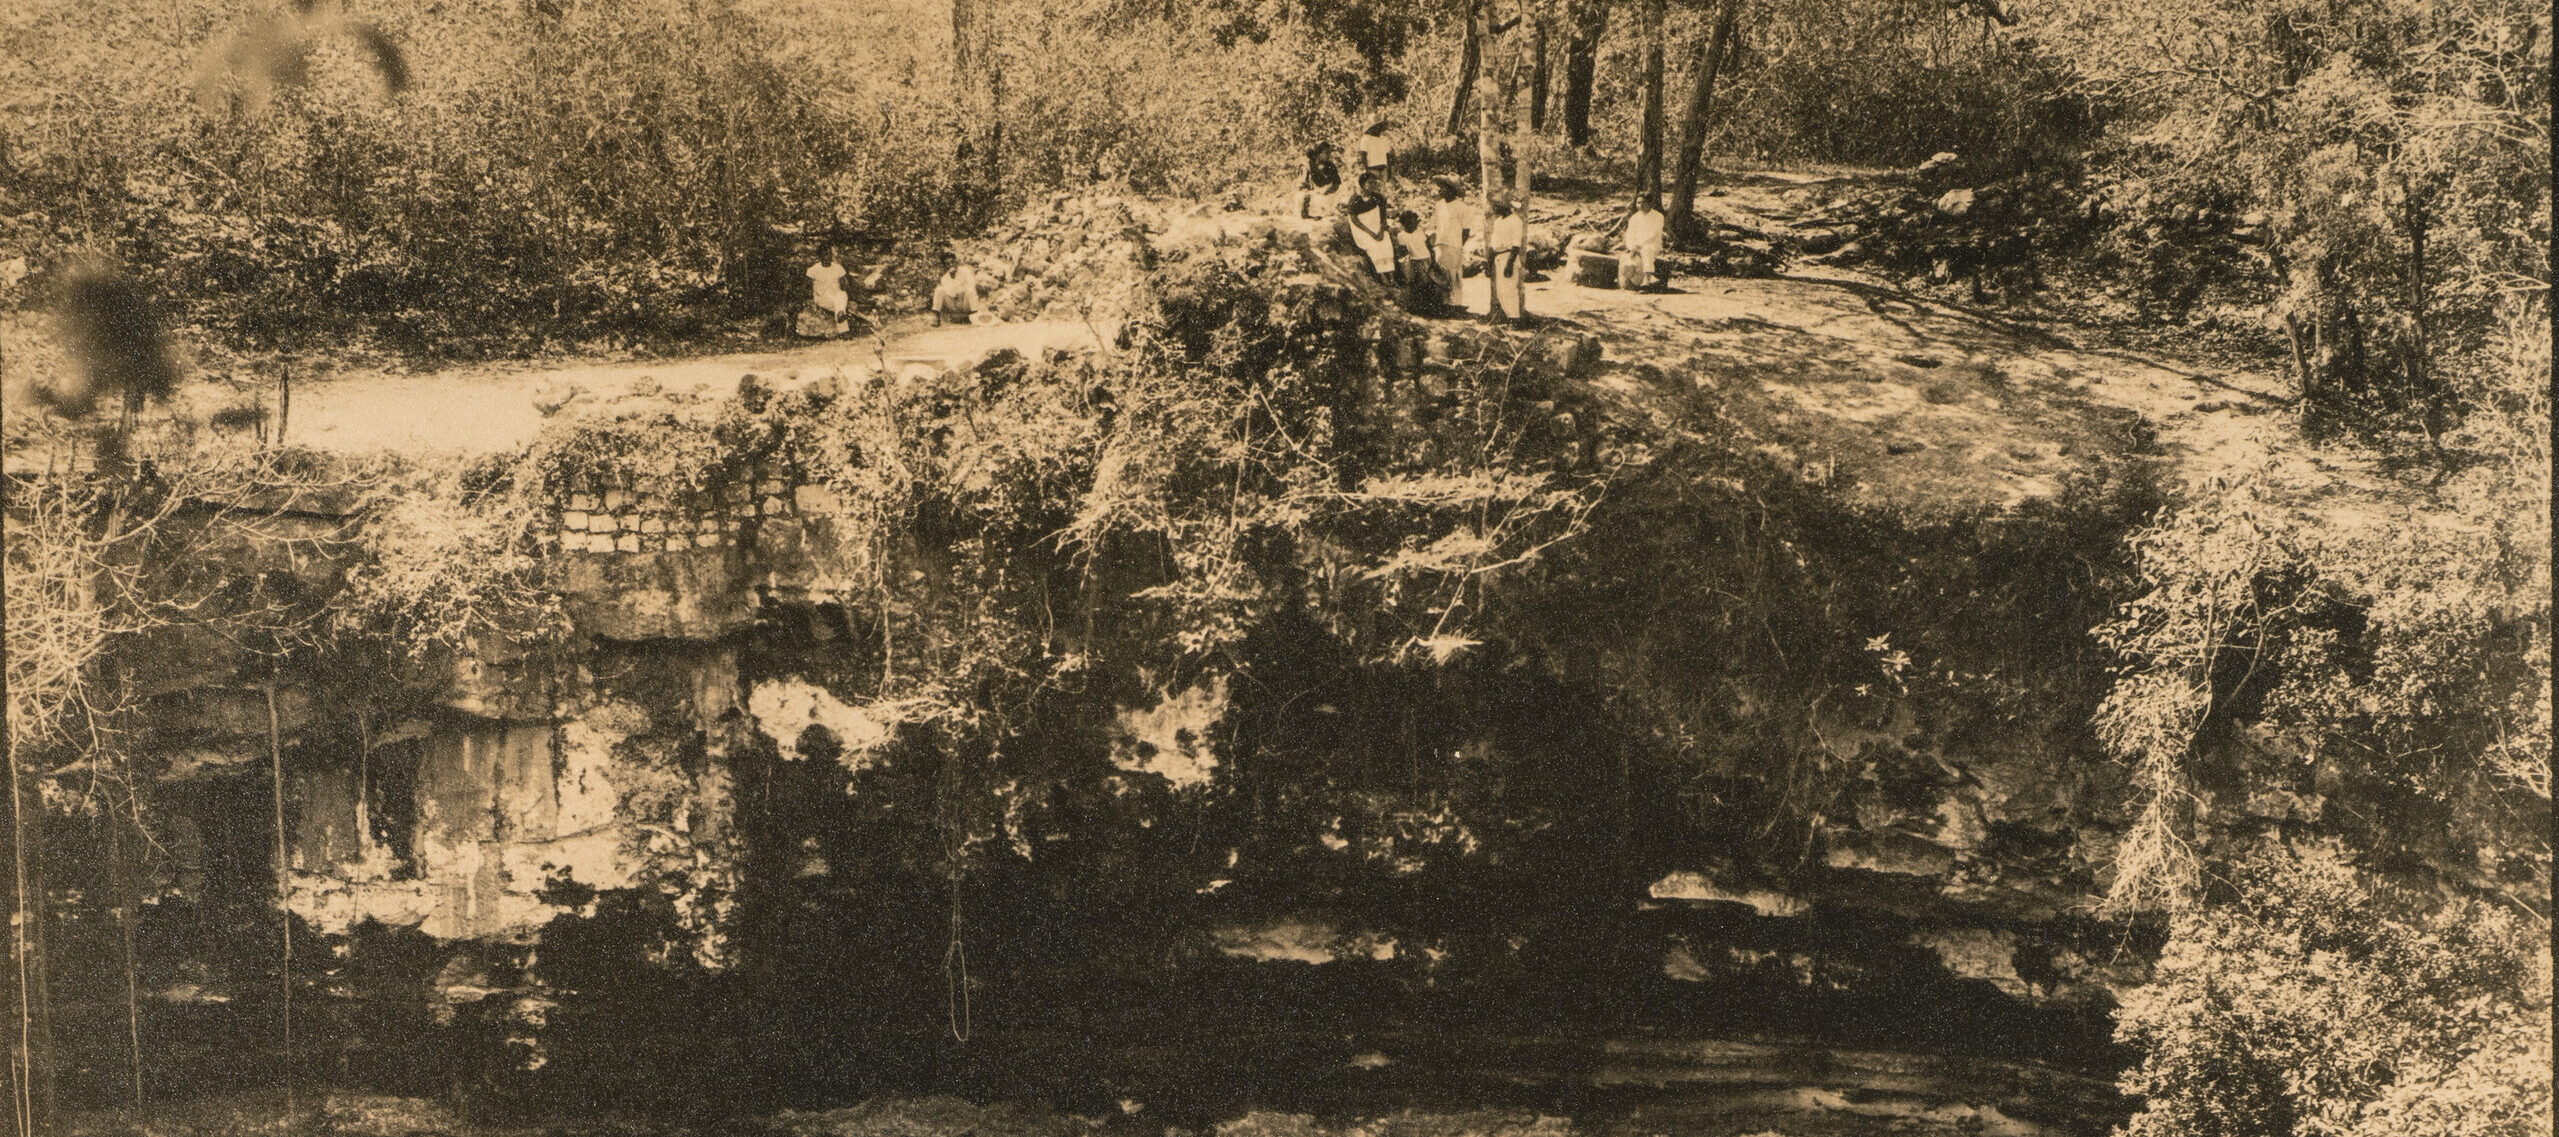 A sepia-toned vintage photograph of a pool of water below a vertical surface of natural rock. A group of figures dressed in white stand and sit on the flat space of ground at the top of the rock face.